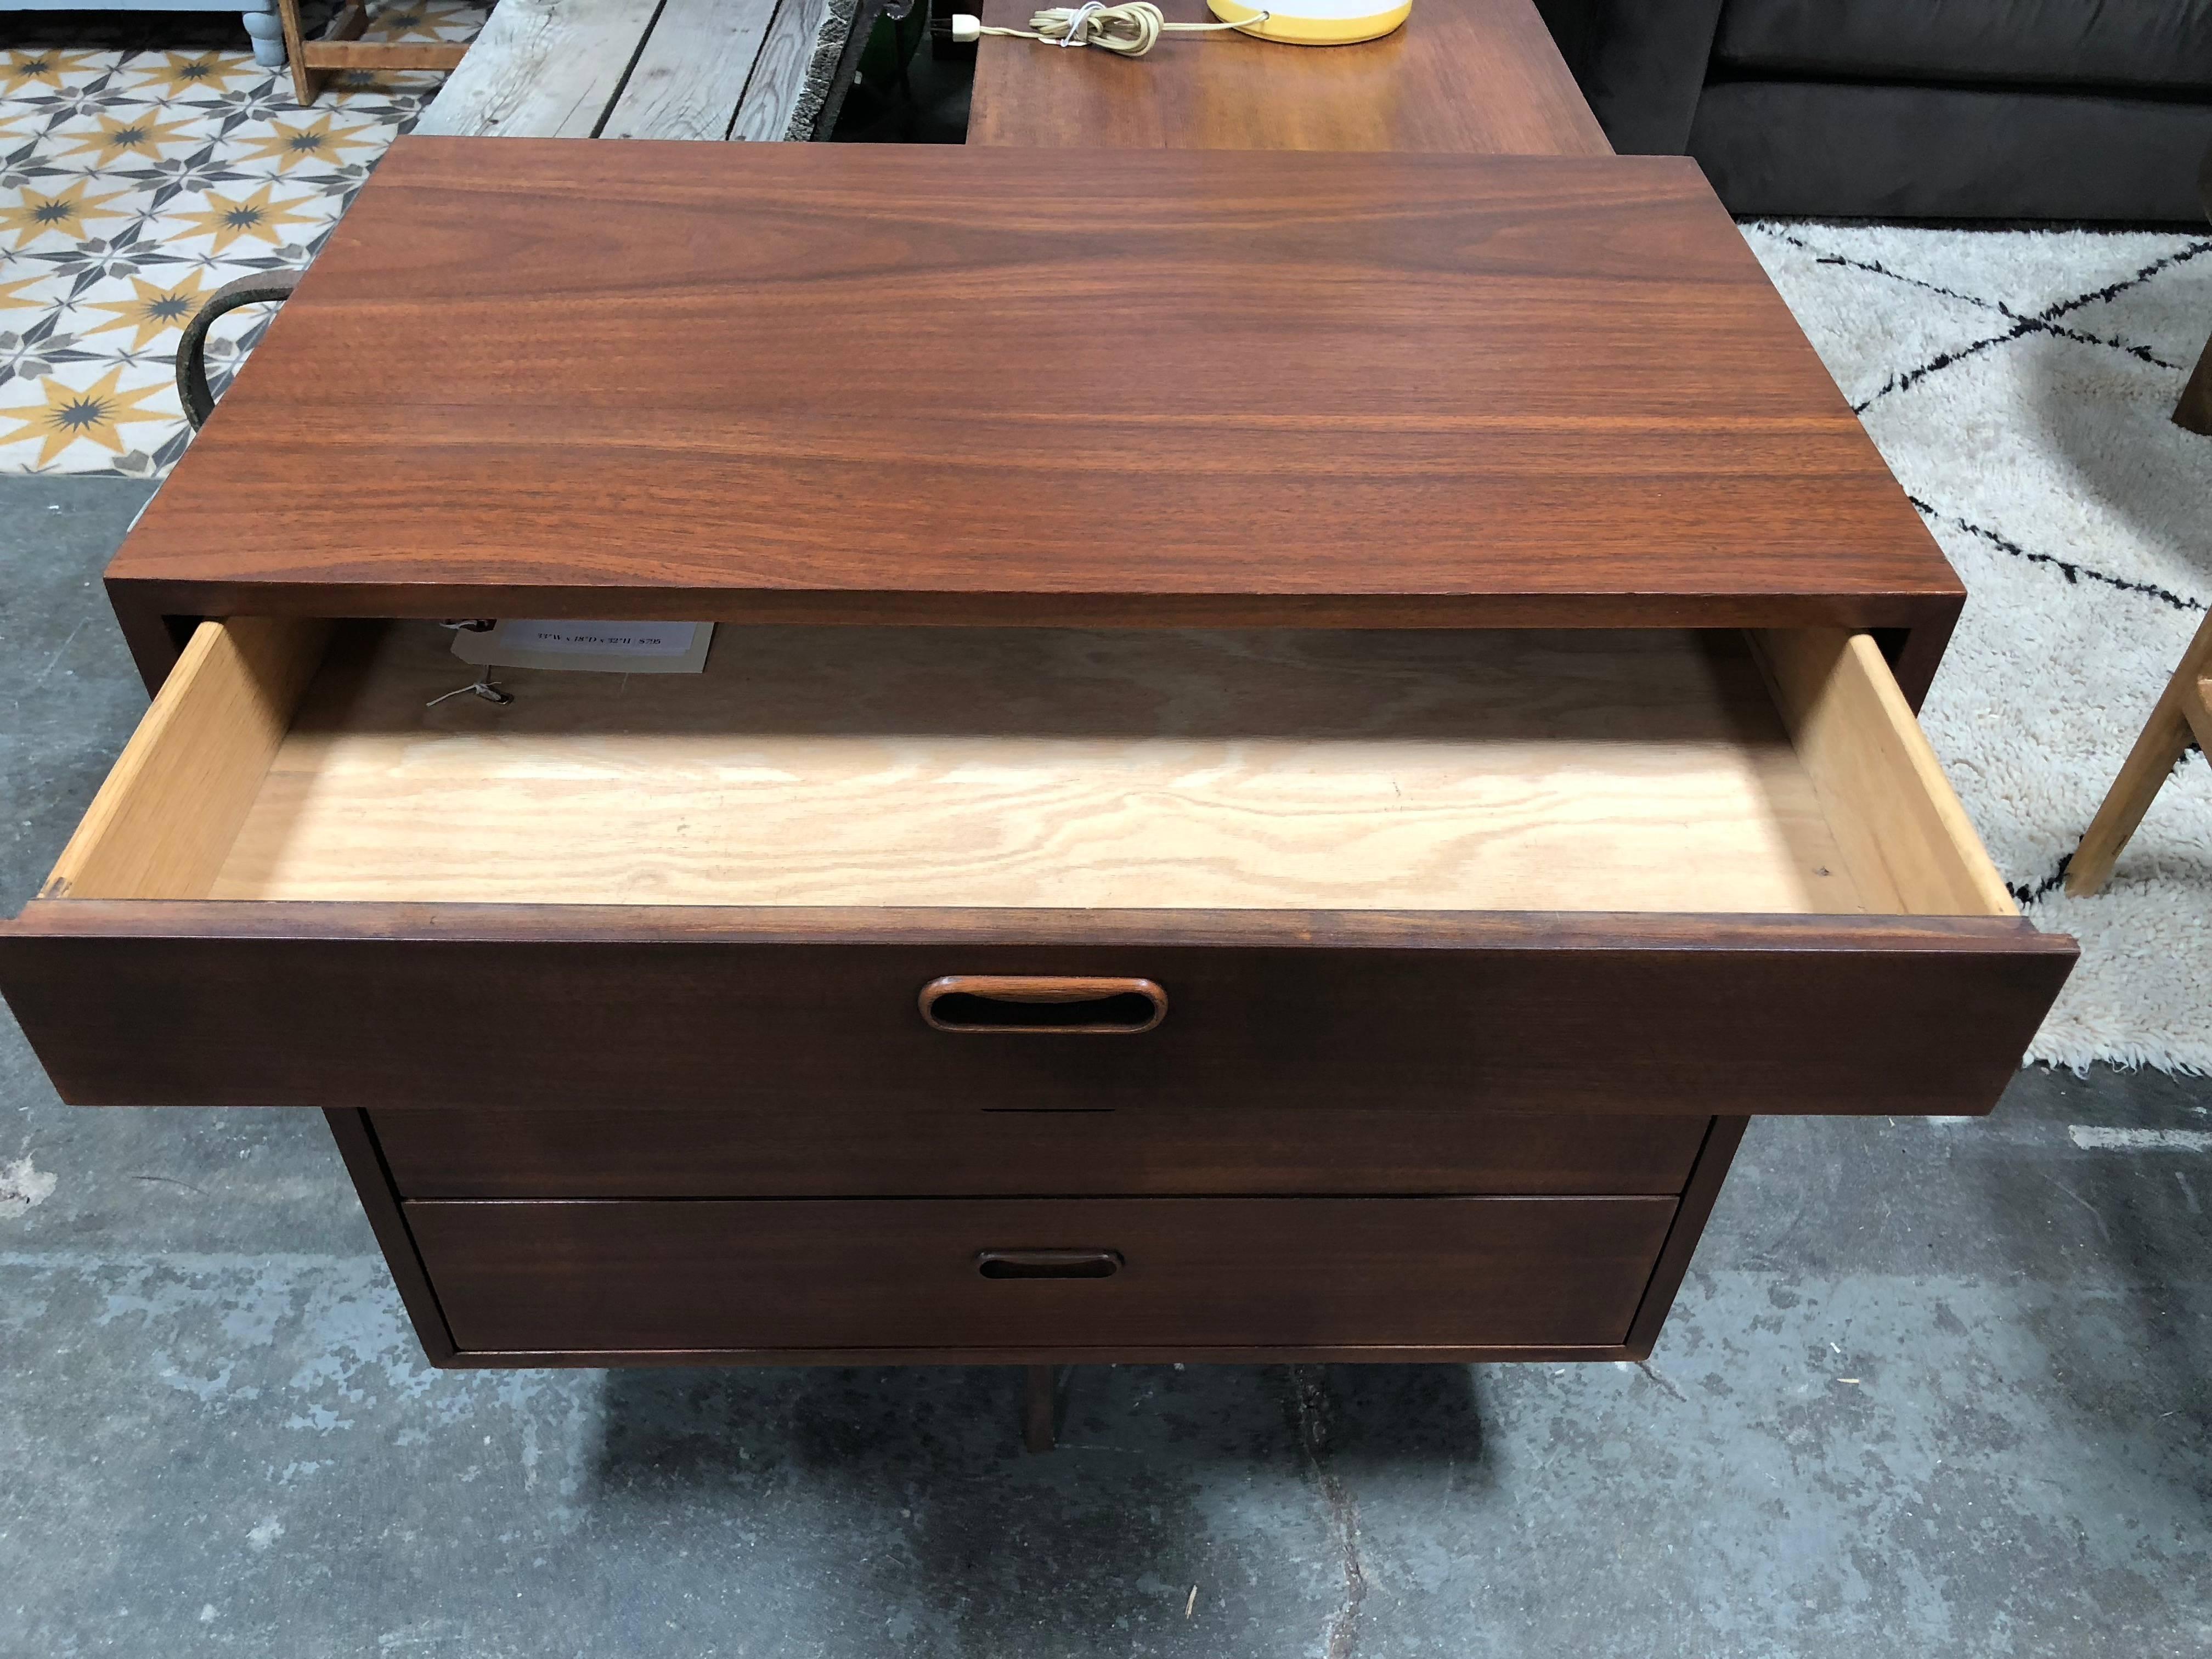 Midcentury dresser with five unique legs and four drawers.
The handcrafted drawer pulls are one of our favorite features.
This piece is in great condition.